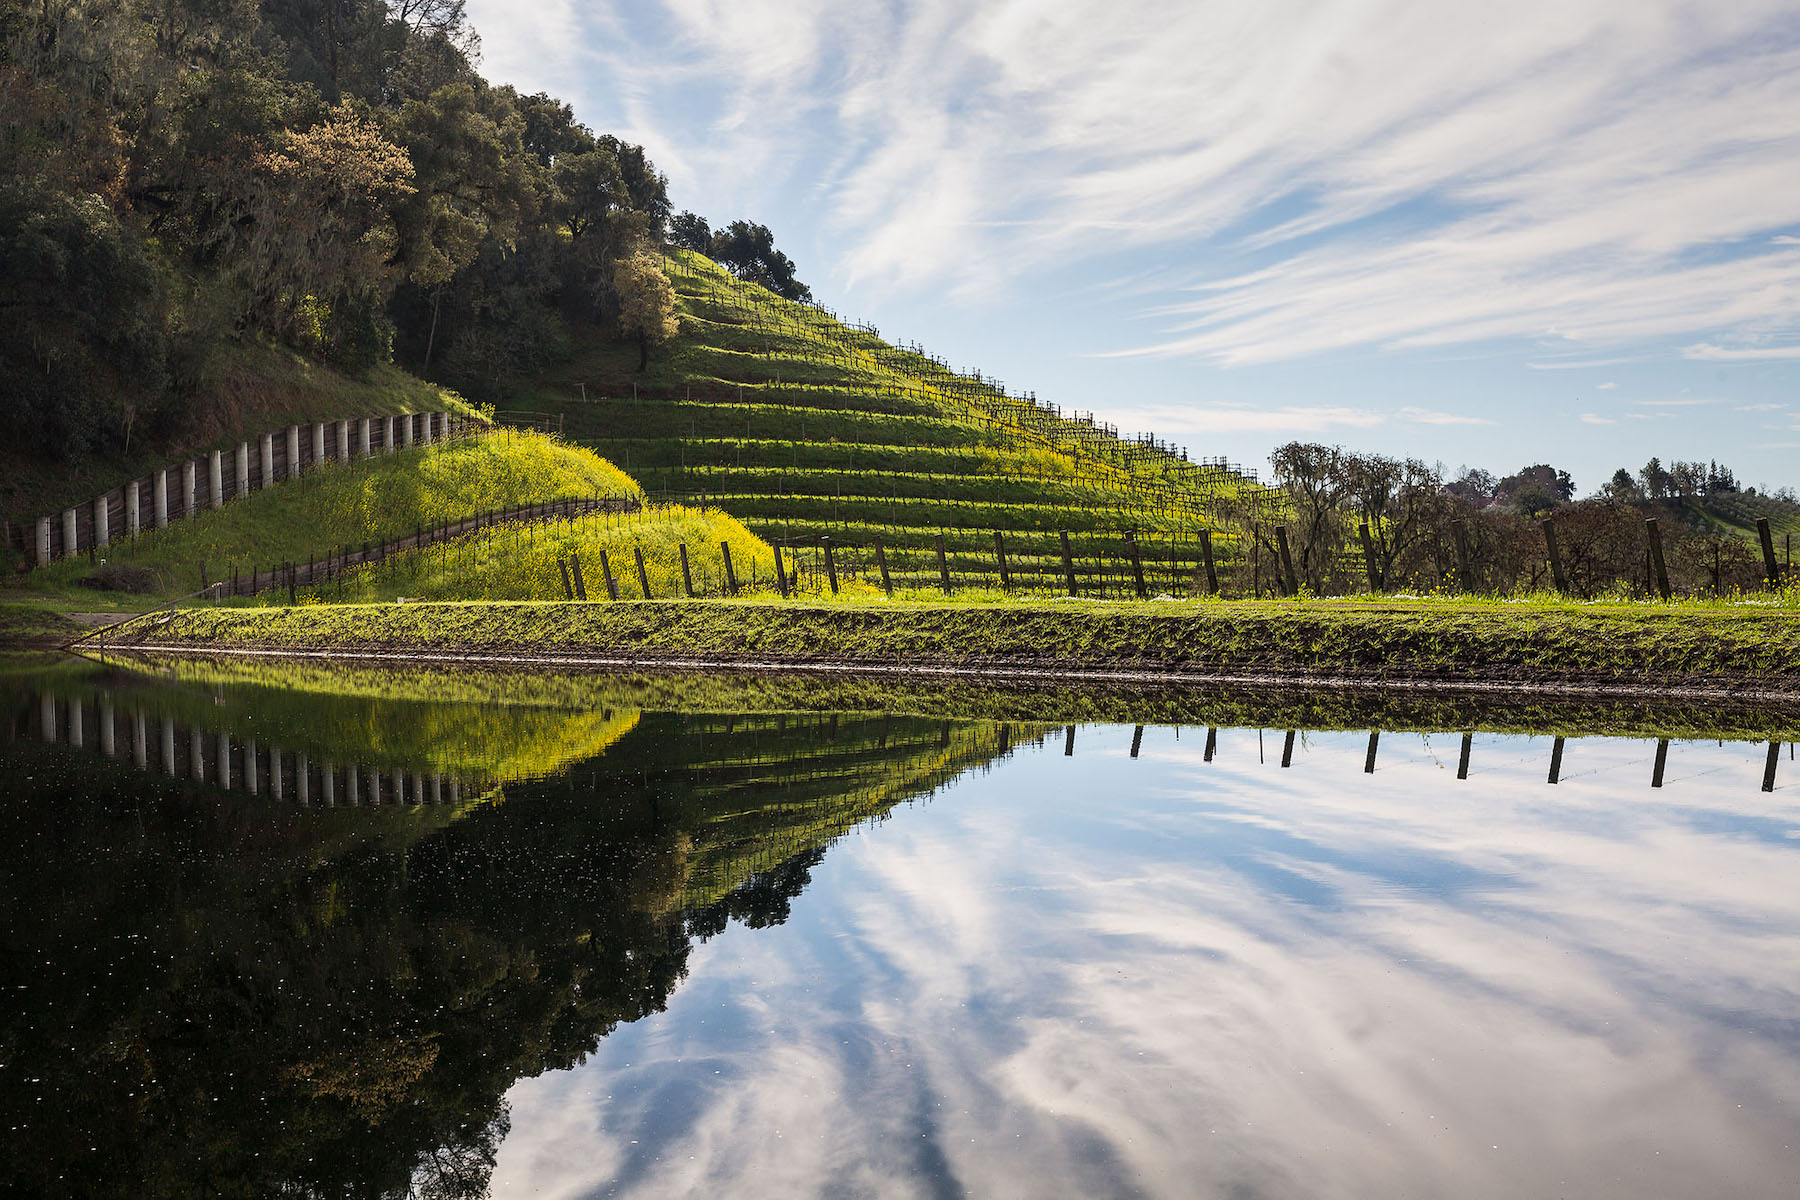 A hill with vineyards is reflected in a still pond